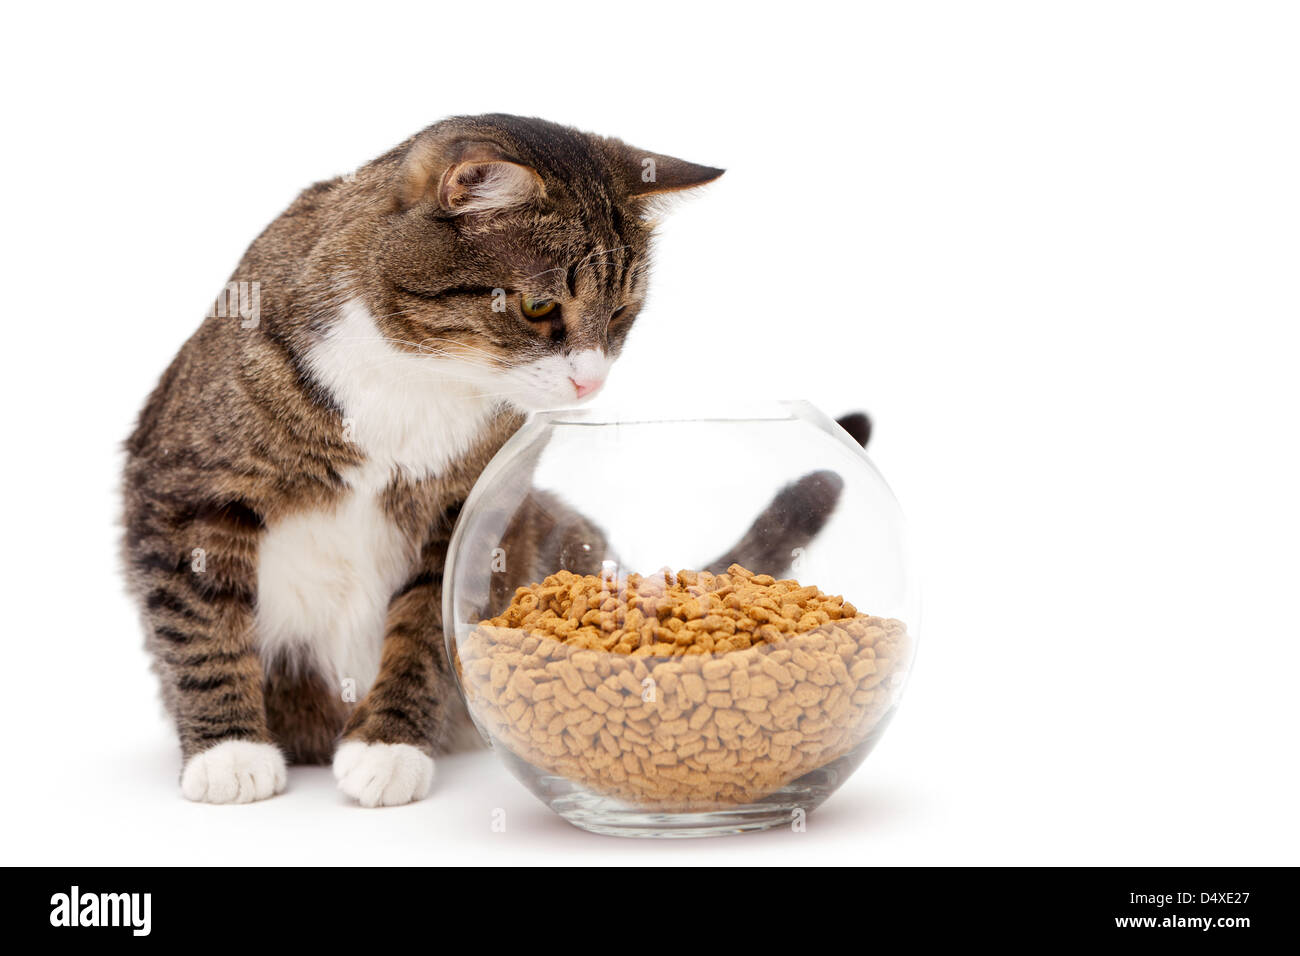 Striped, gray cat and a heap of dry food, isolated on white Stock Photo